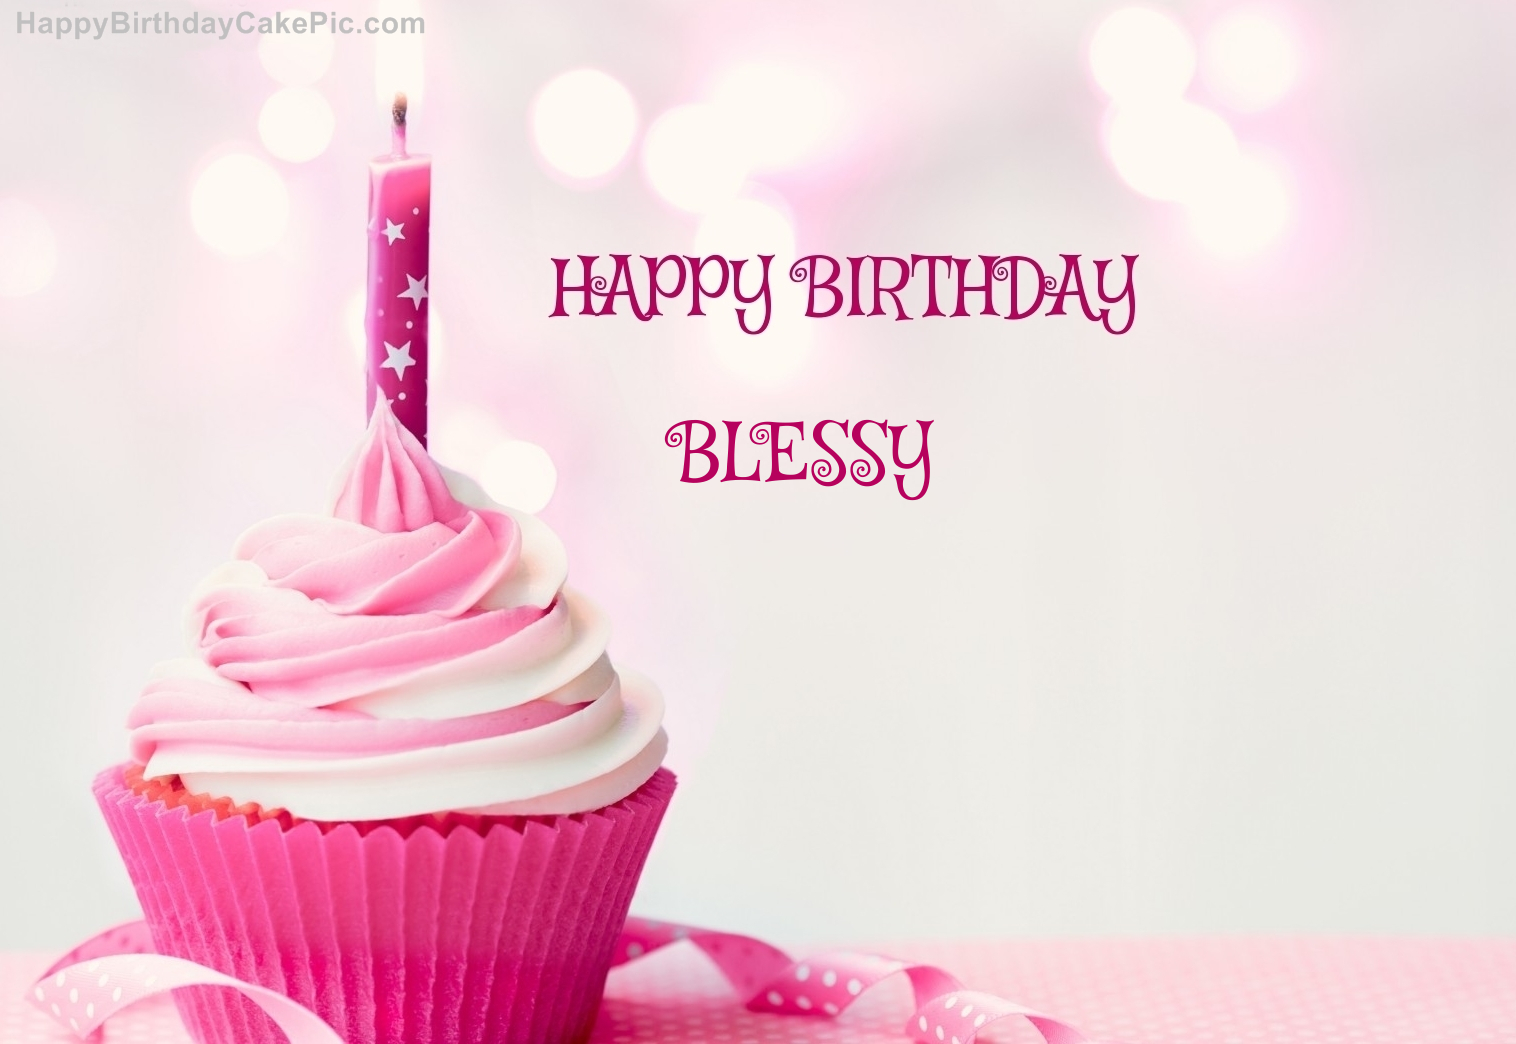 Happy Birthday Blessy Grace🎂... - S&A Cakes and Cupcakes | Facebook